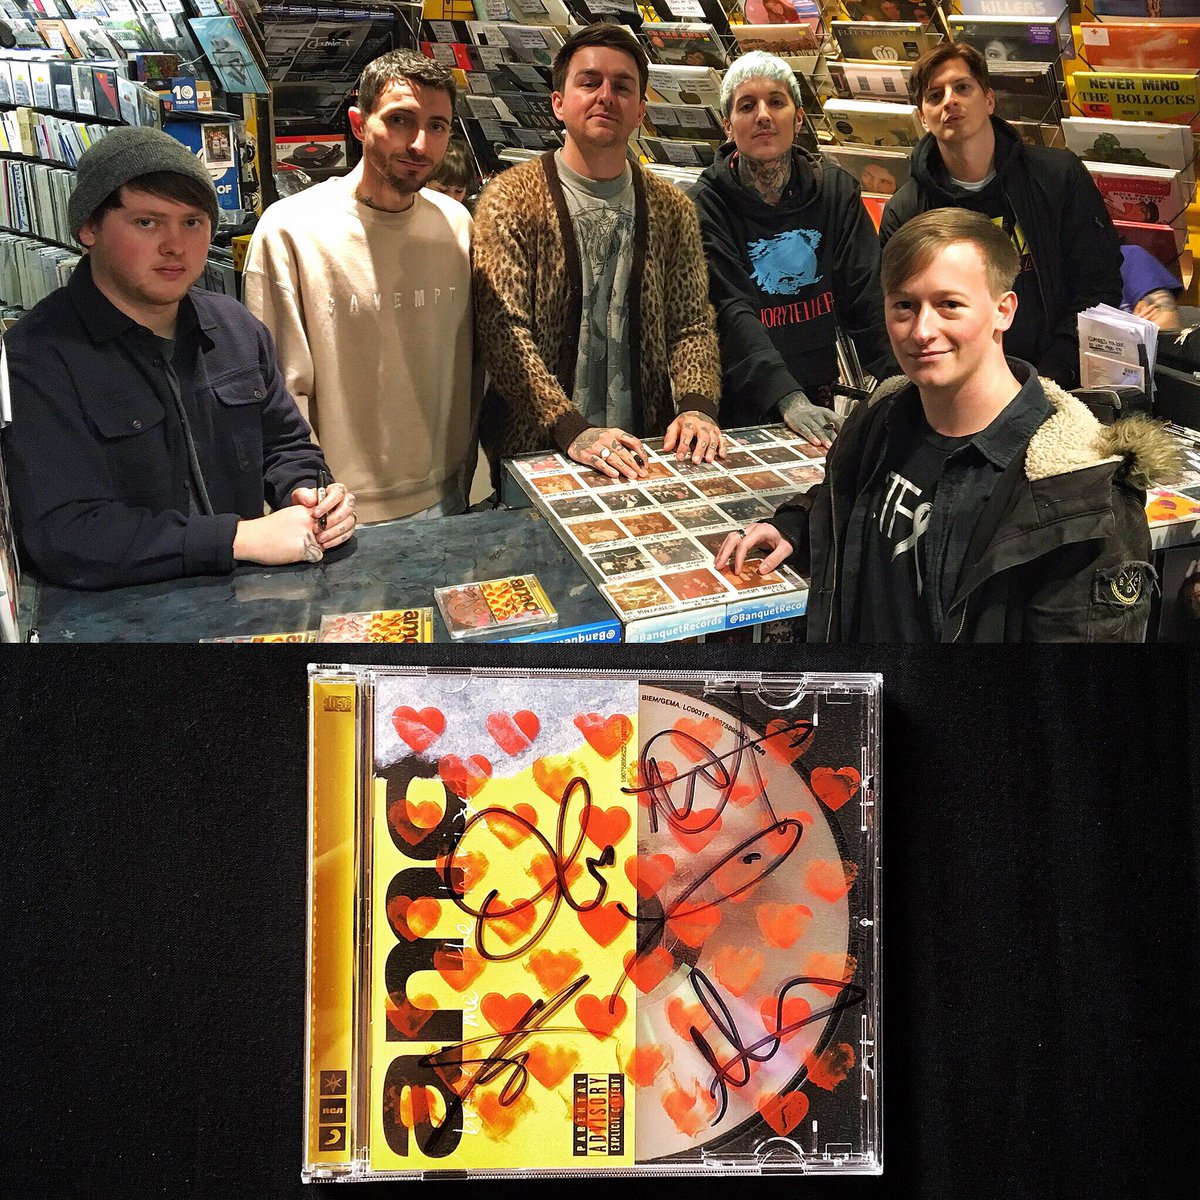 In @BanquetRecords yesterday with @bmthofficial! 

instagram.com/p/BvEoI8lHArr/

#BringMeTheHorizon #BMTH #BanquetRecords #Amo #AlbumSigning